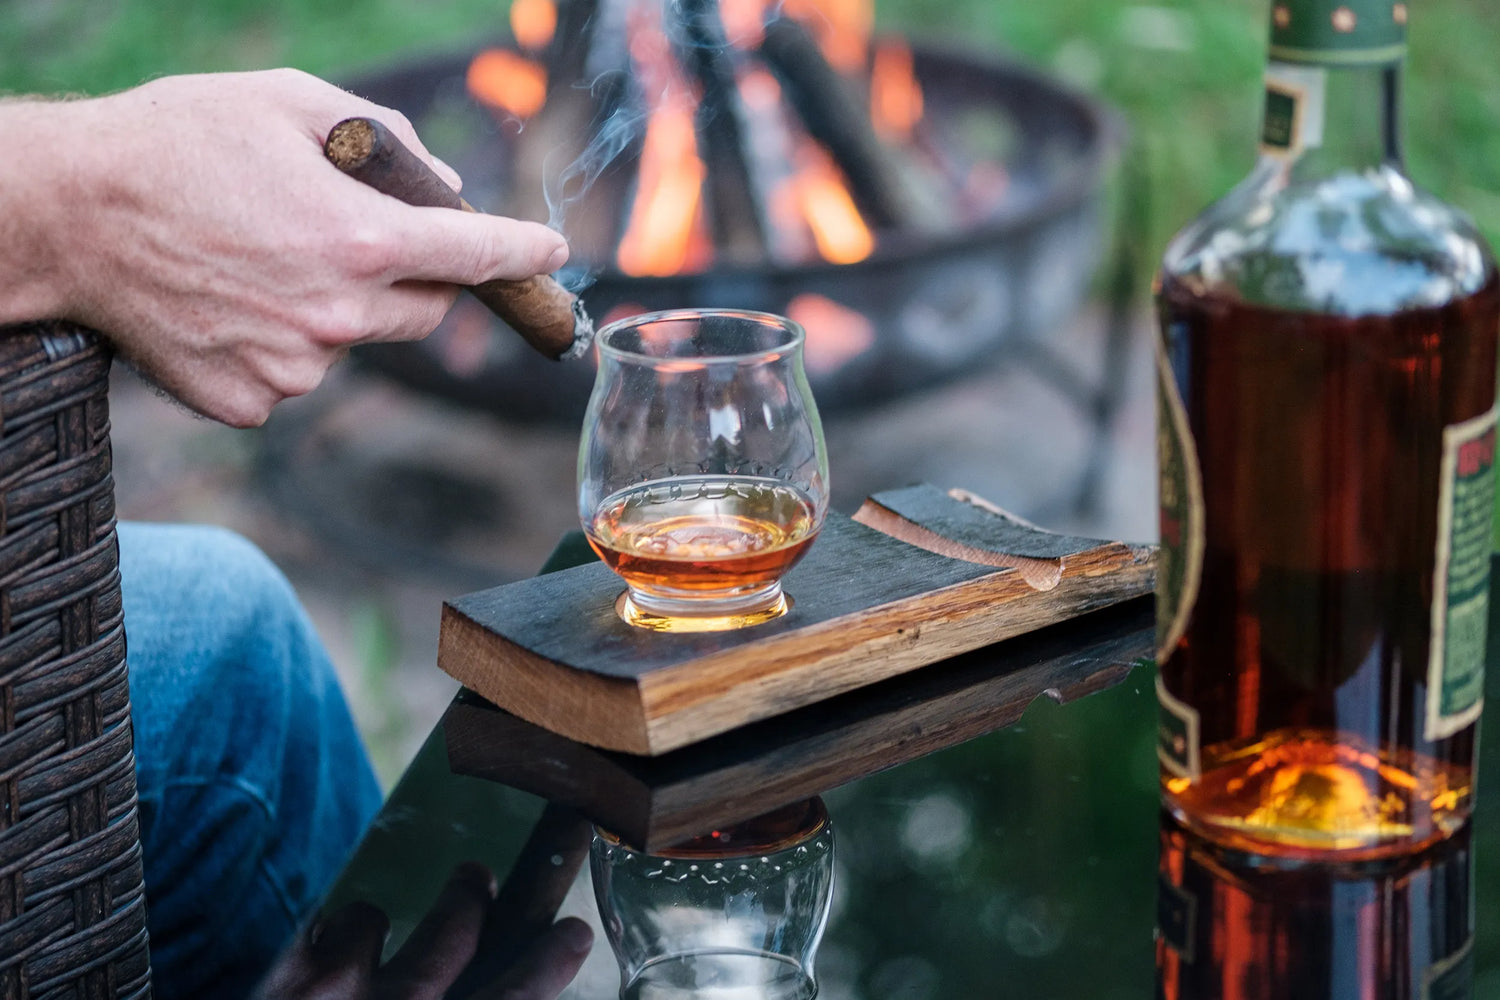 Man sitting by a fire holding a cigar next to a glass of whiskey.